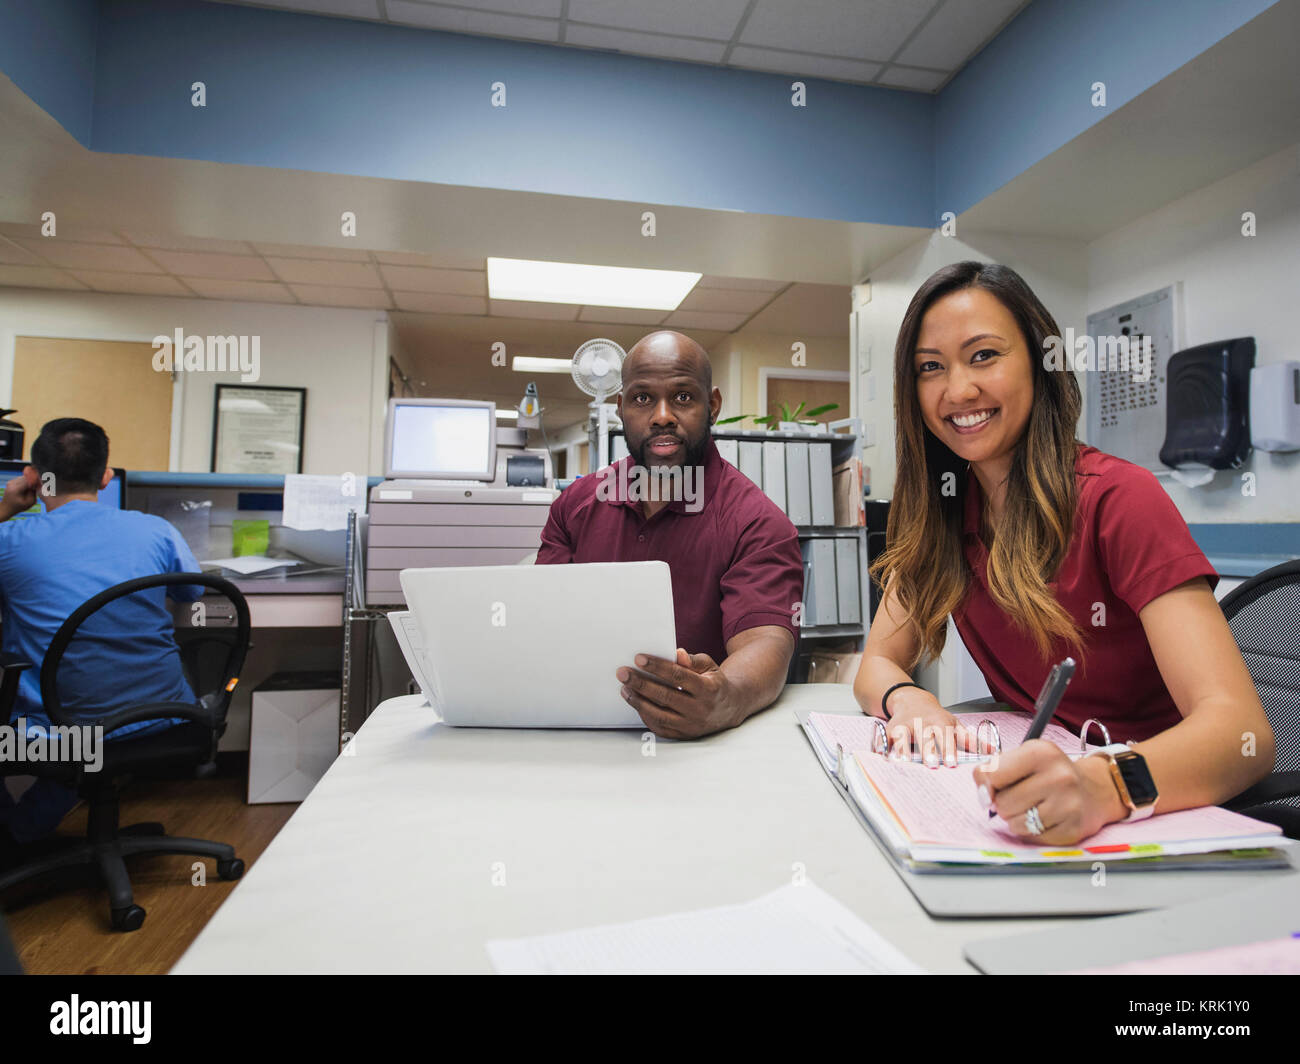 Portrait of smiling nurses with binders and hospital Stock Photo